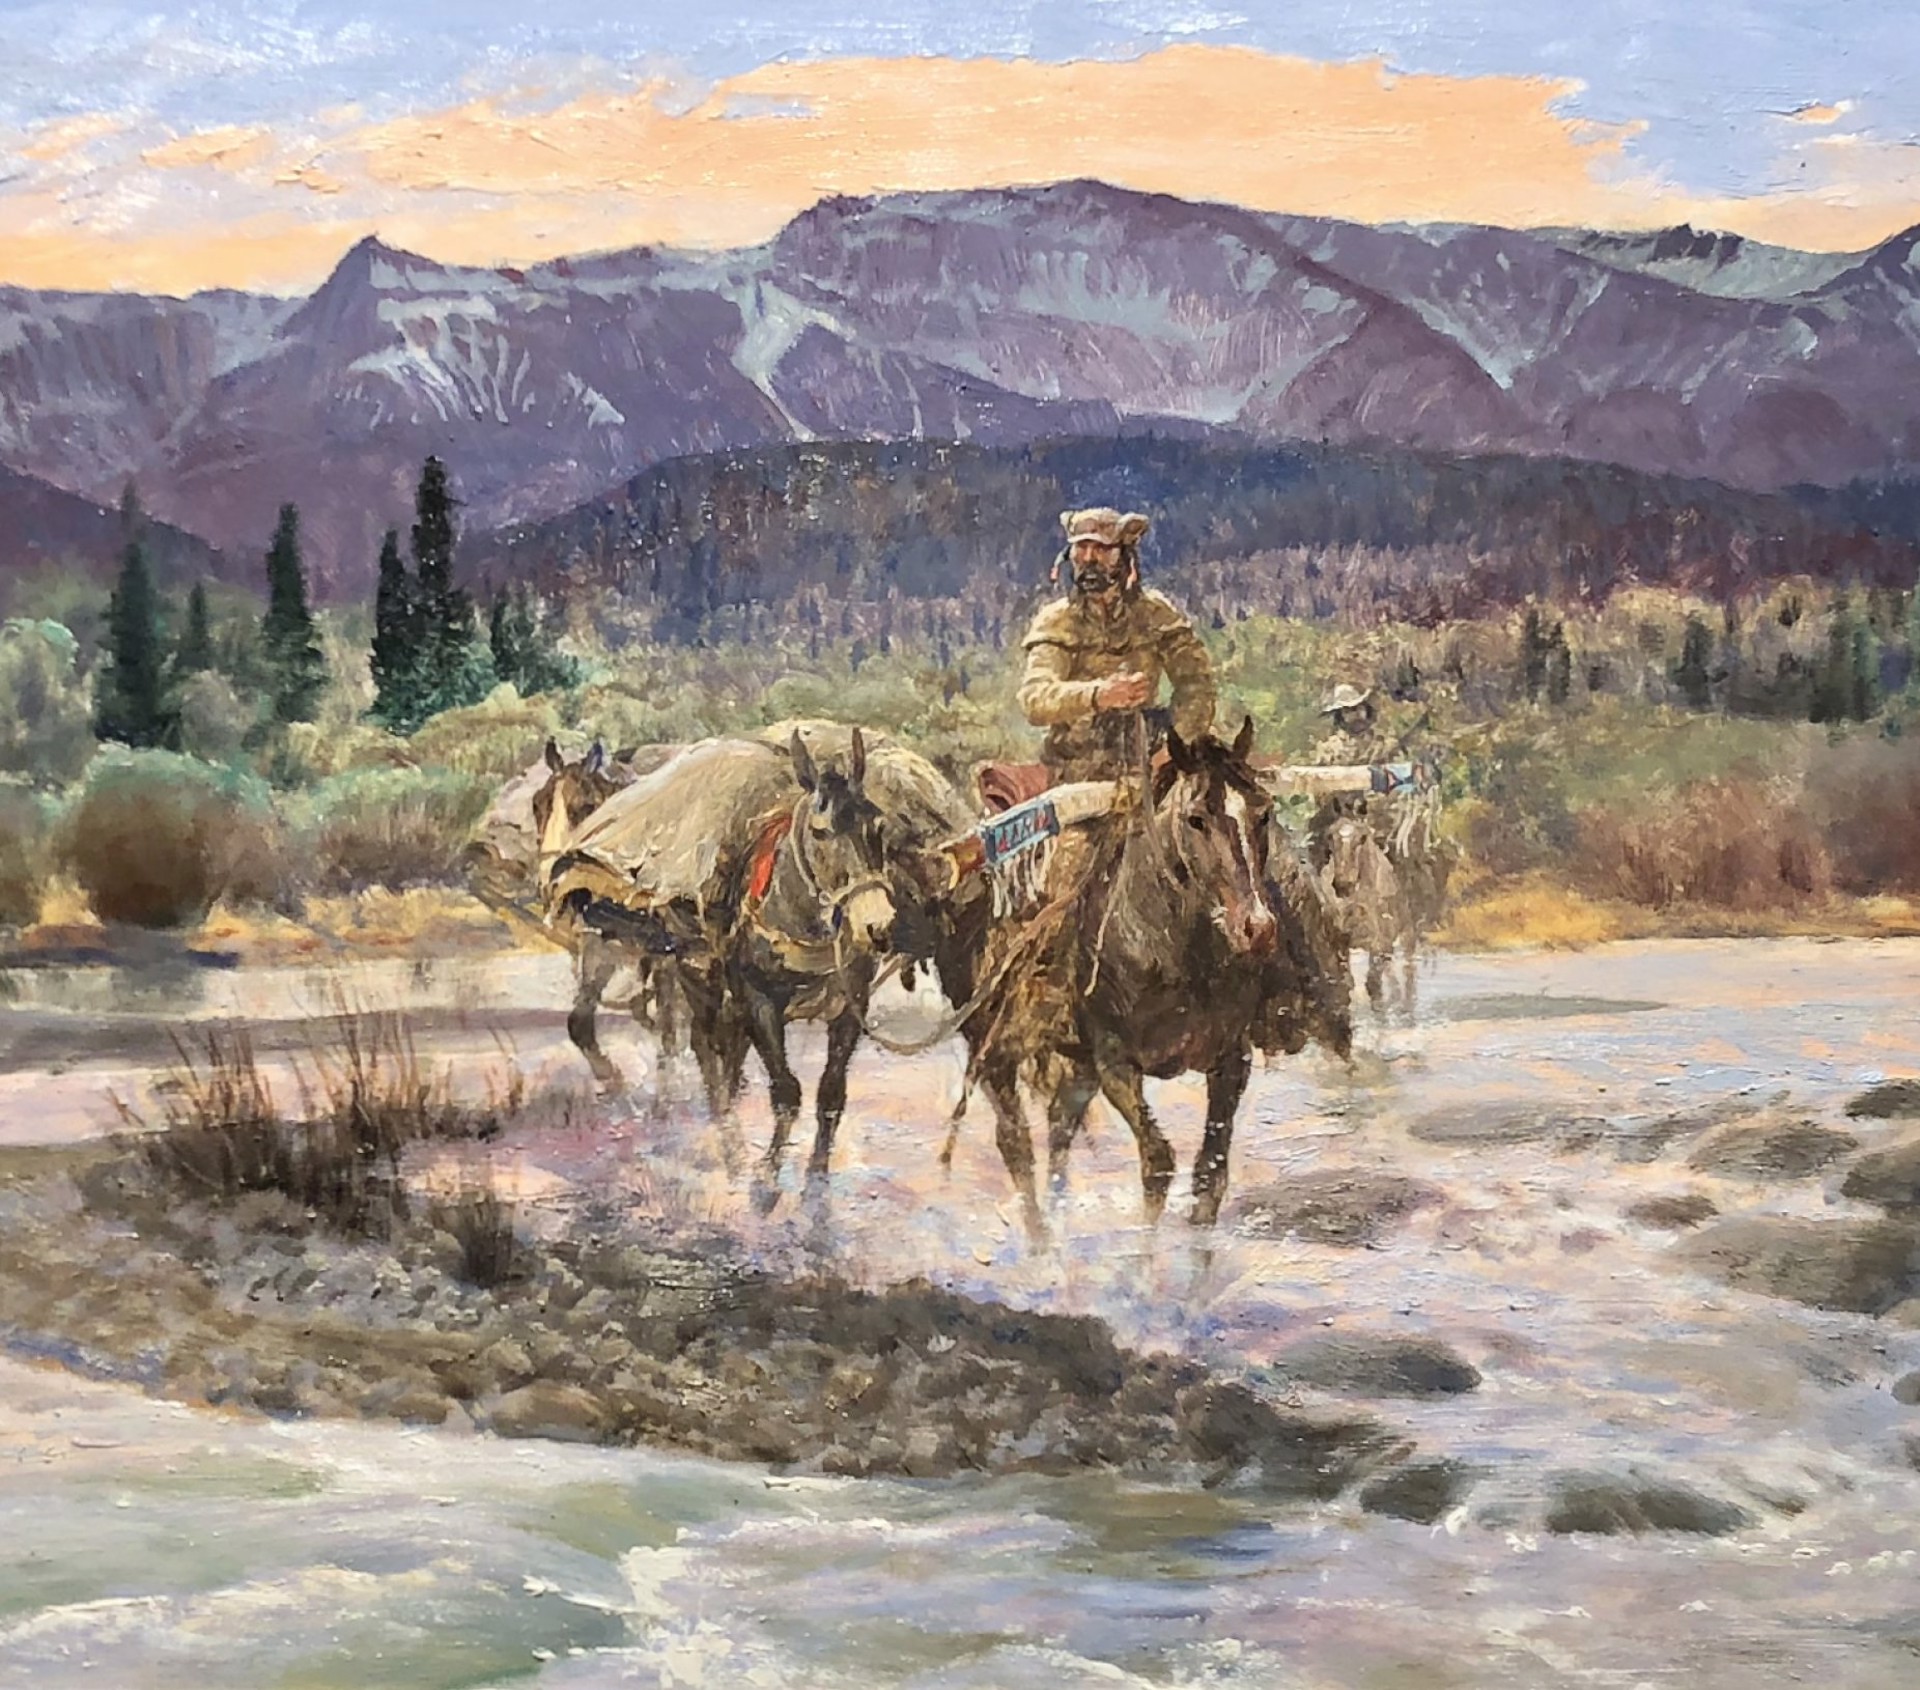 Evening on the Hoback by John F. Clymer [1907-1989]